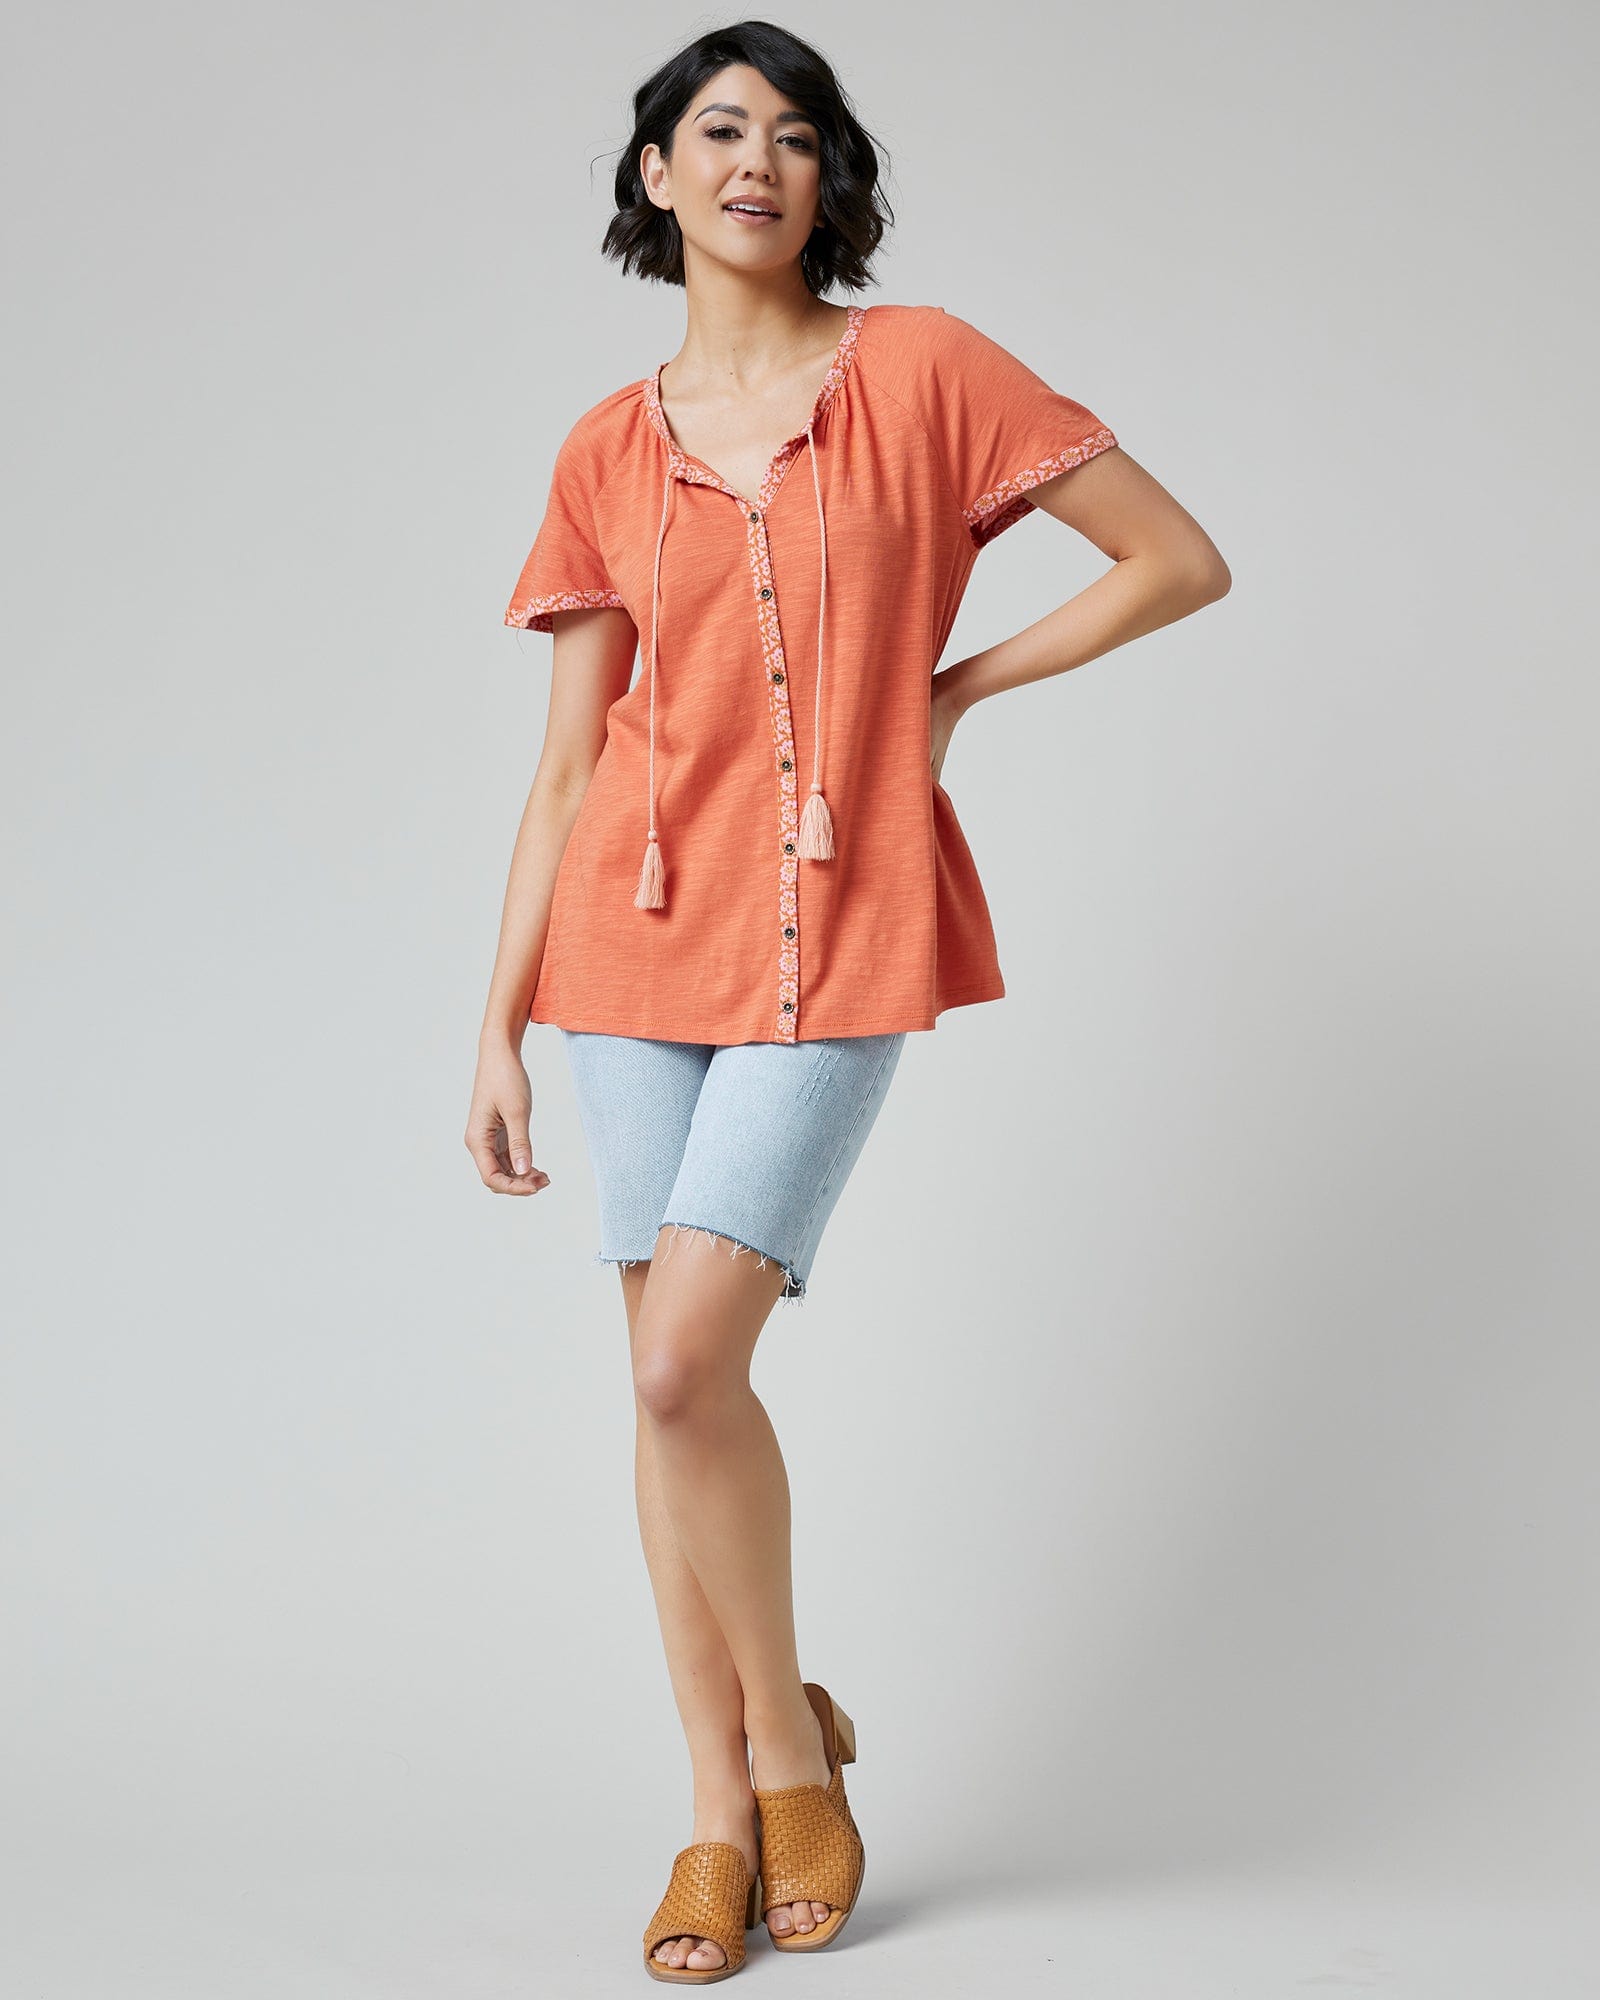 Woman in an orange top with short sleeves and buttons down the front